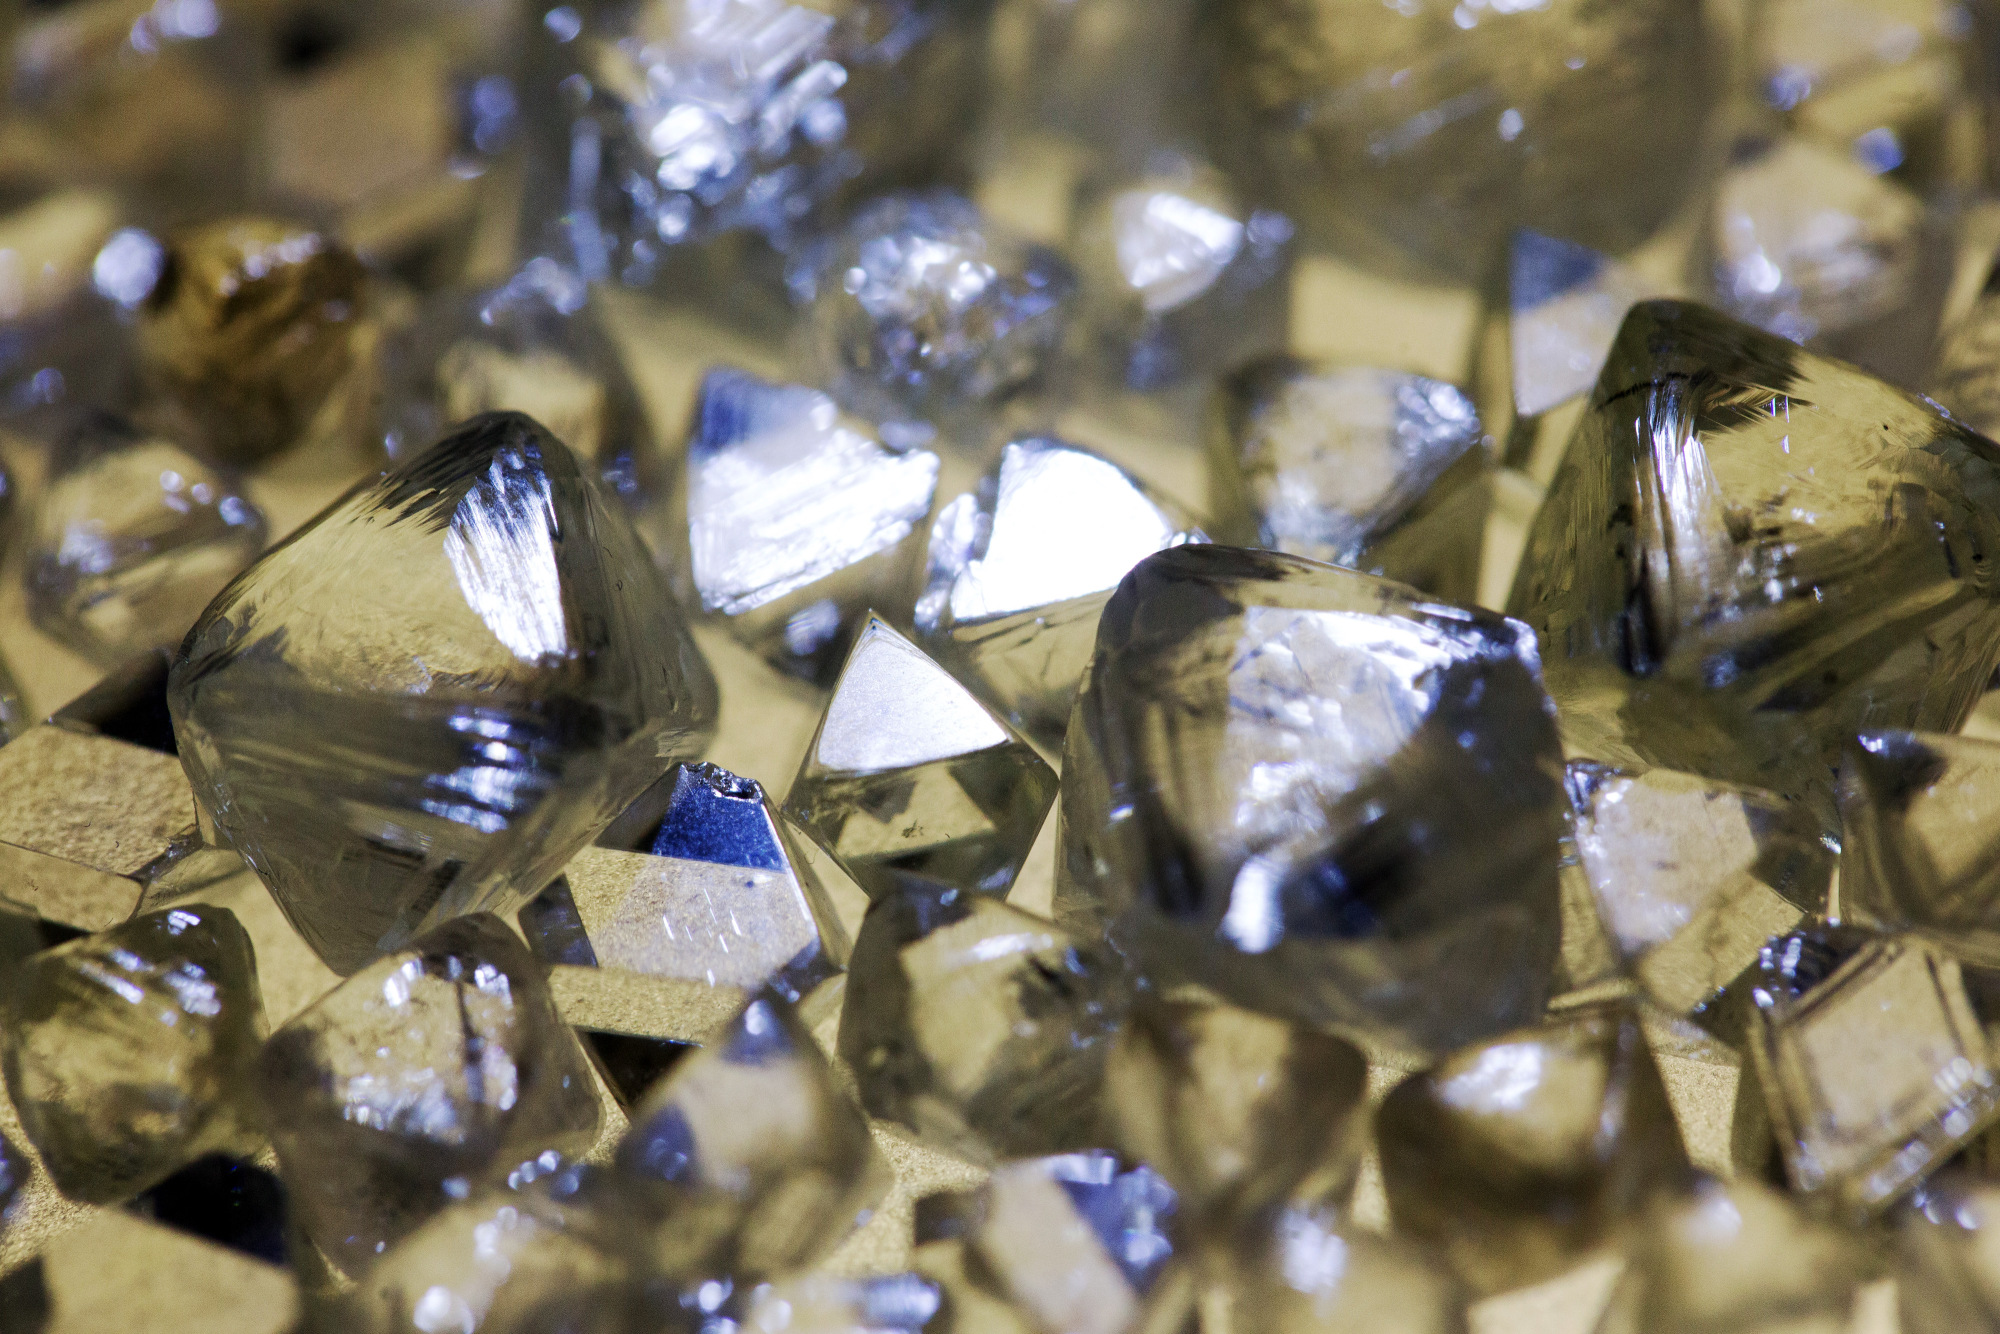 De Beers CEO sees stable natural diamond supply, decent industry growth